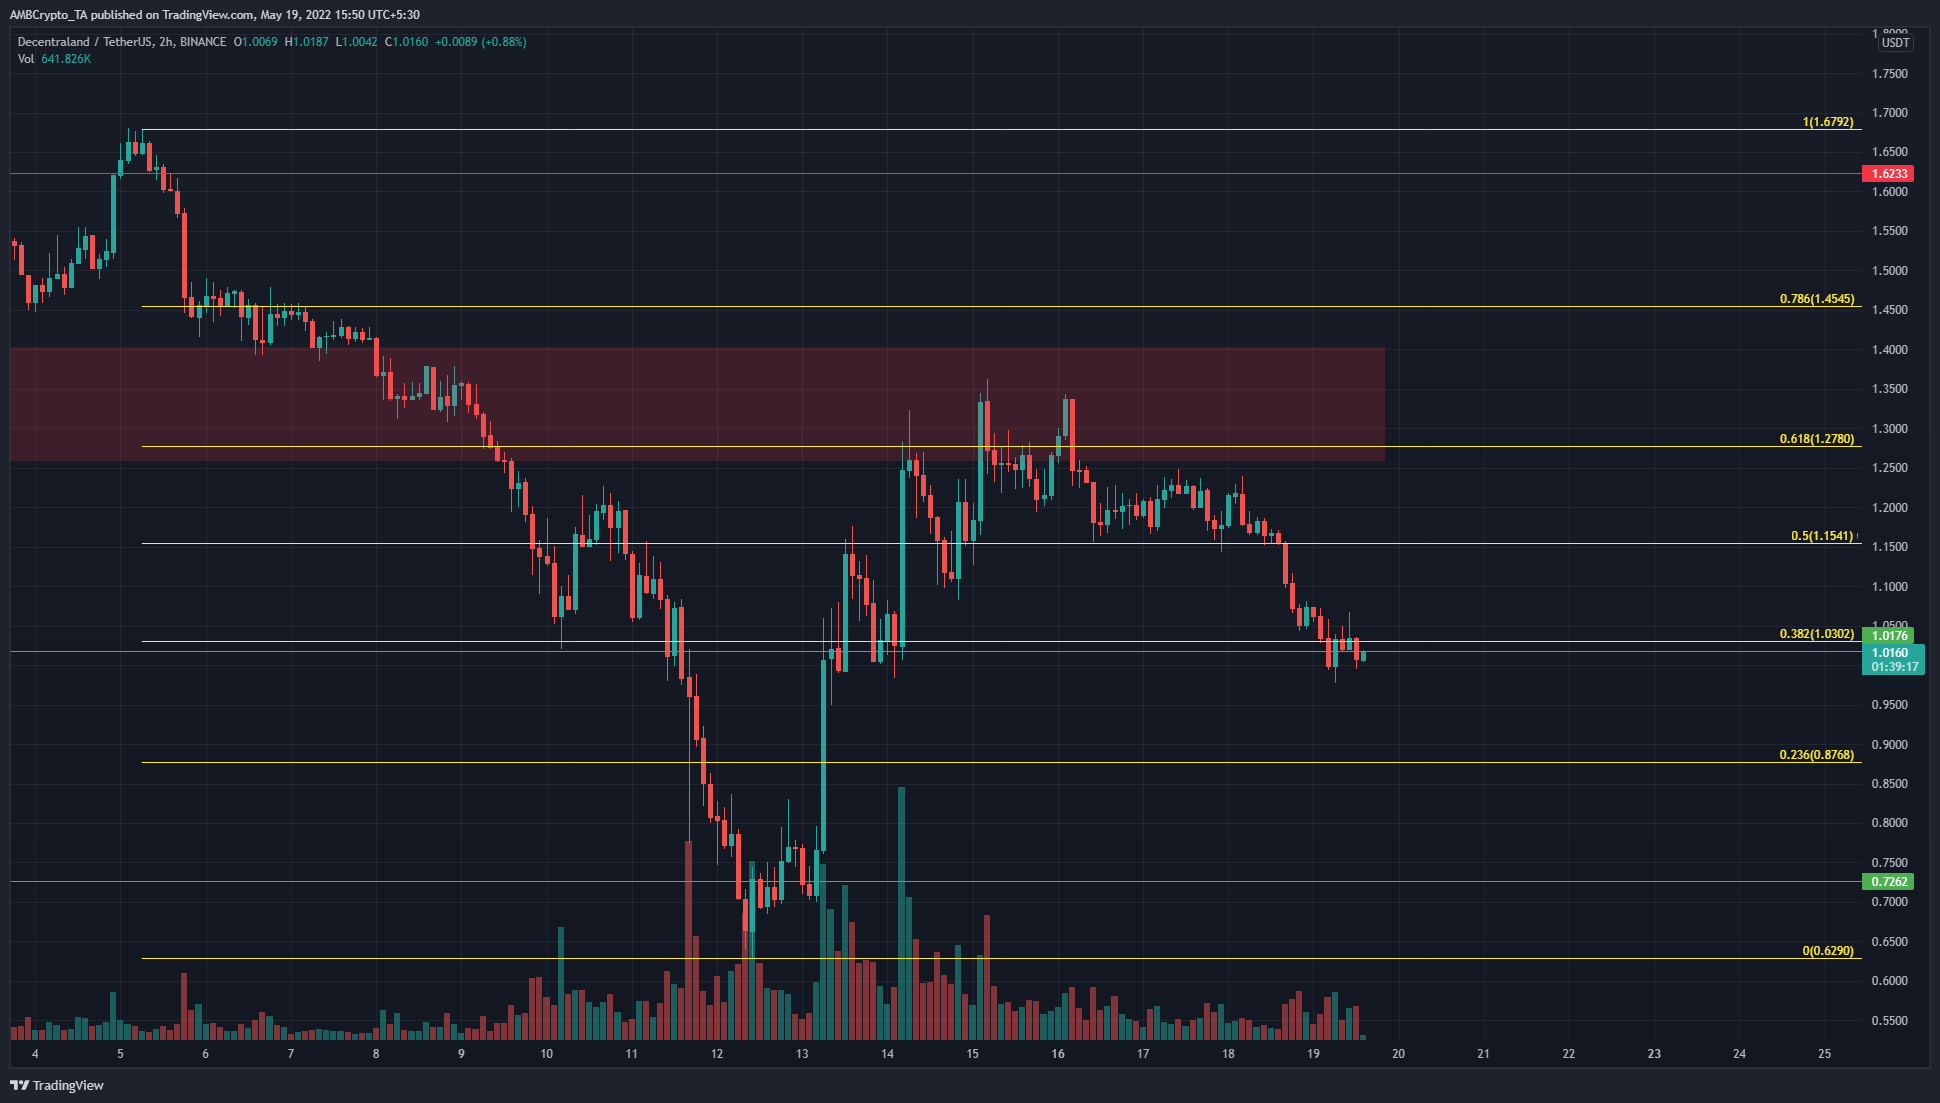 Decentraland unable to climb past resistance, but bulls haven't given up yet